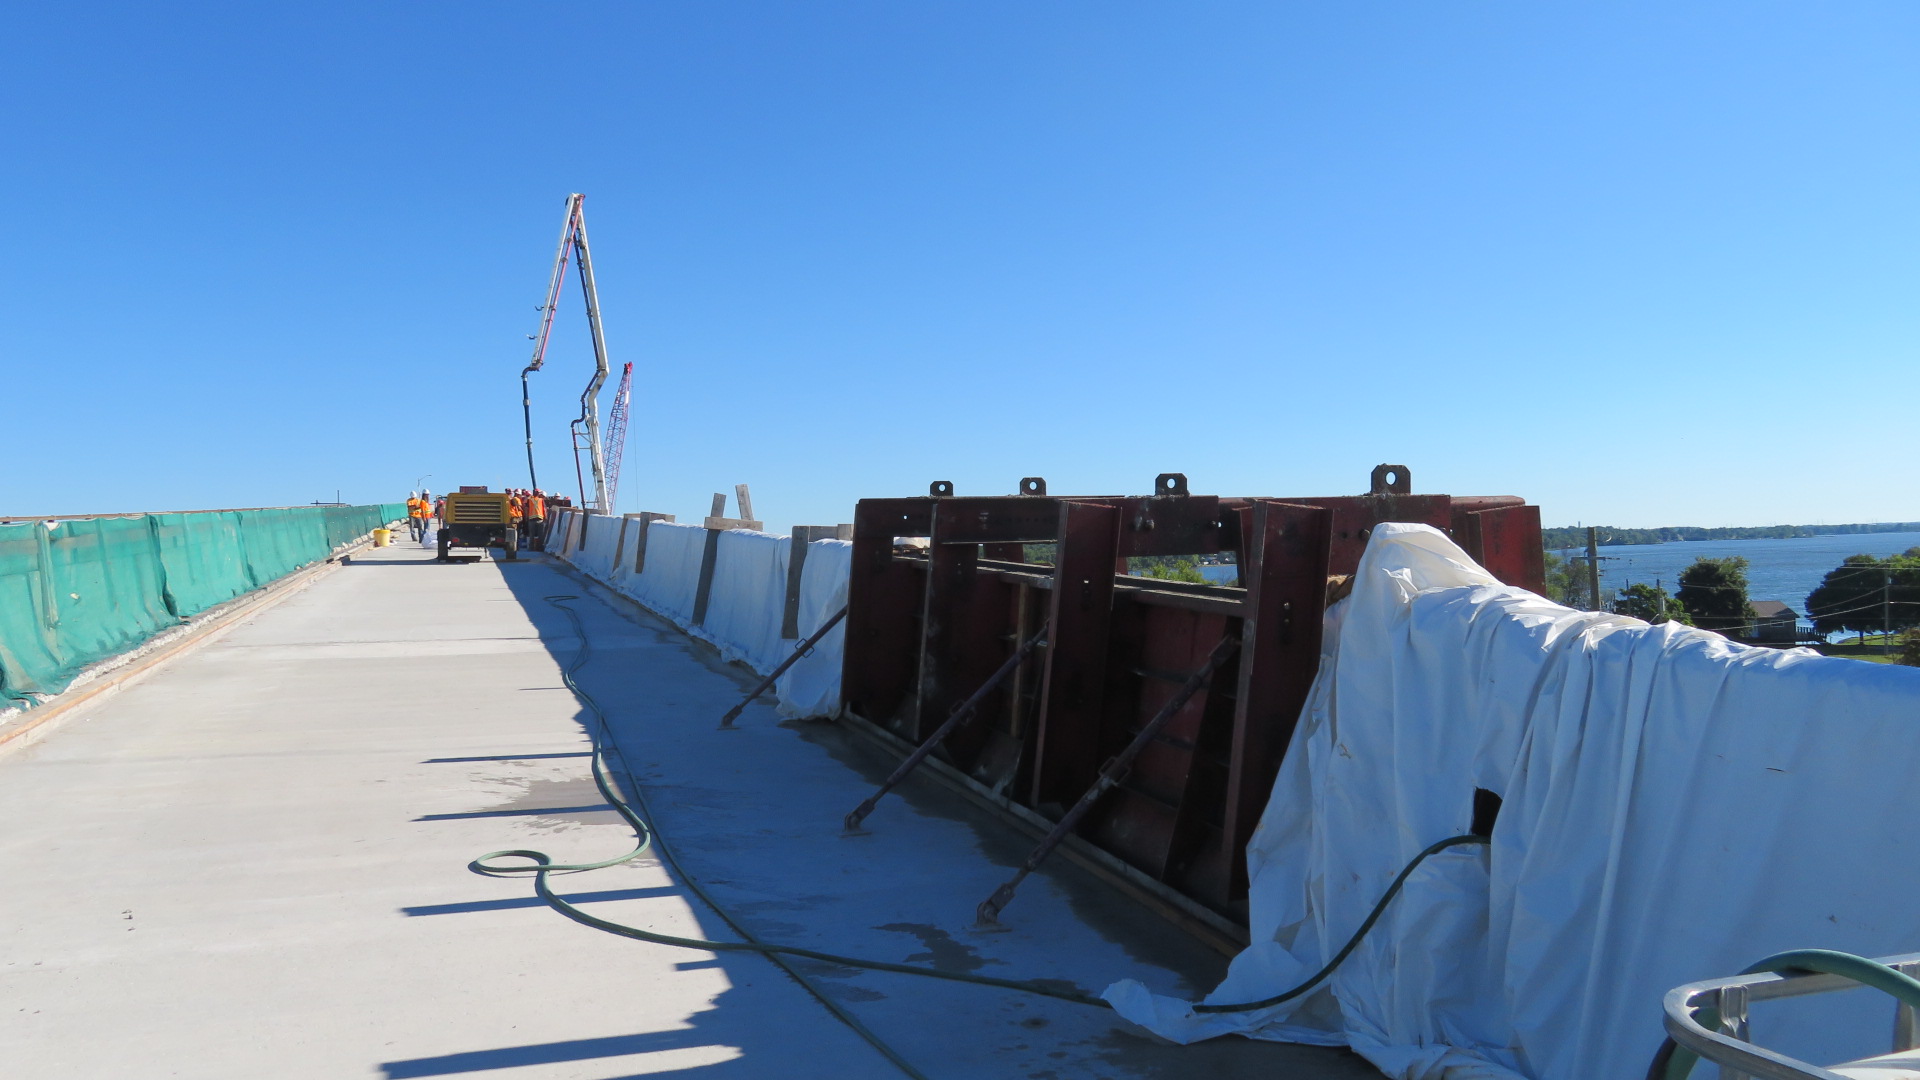 View north, completed section of concrete barrier wall and barrier wall forms